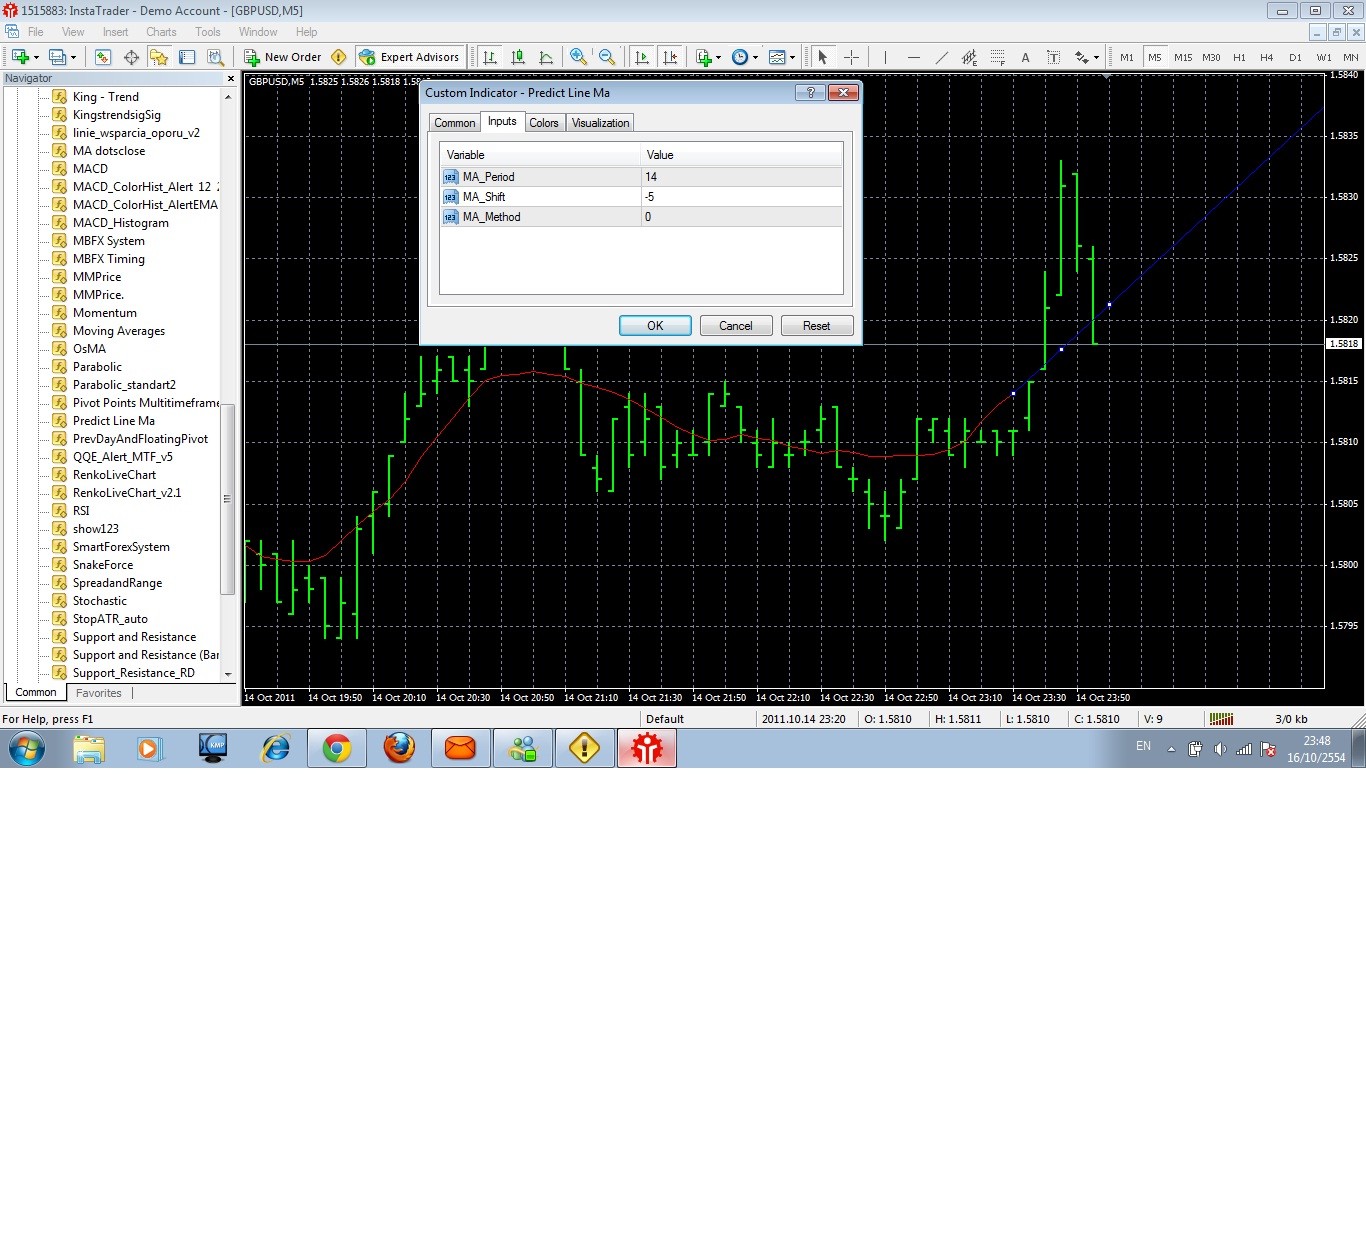 Please Help about draw moving average line - Moving ...